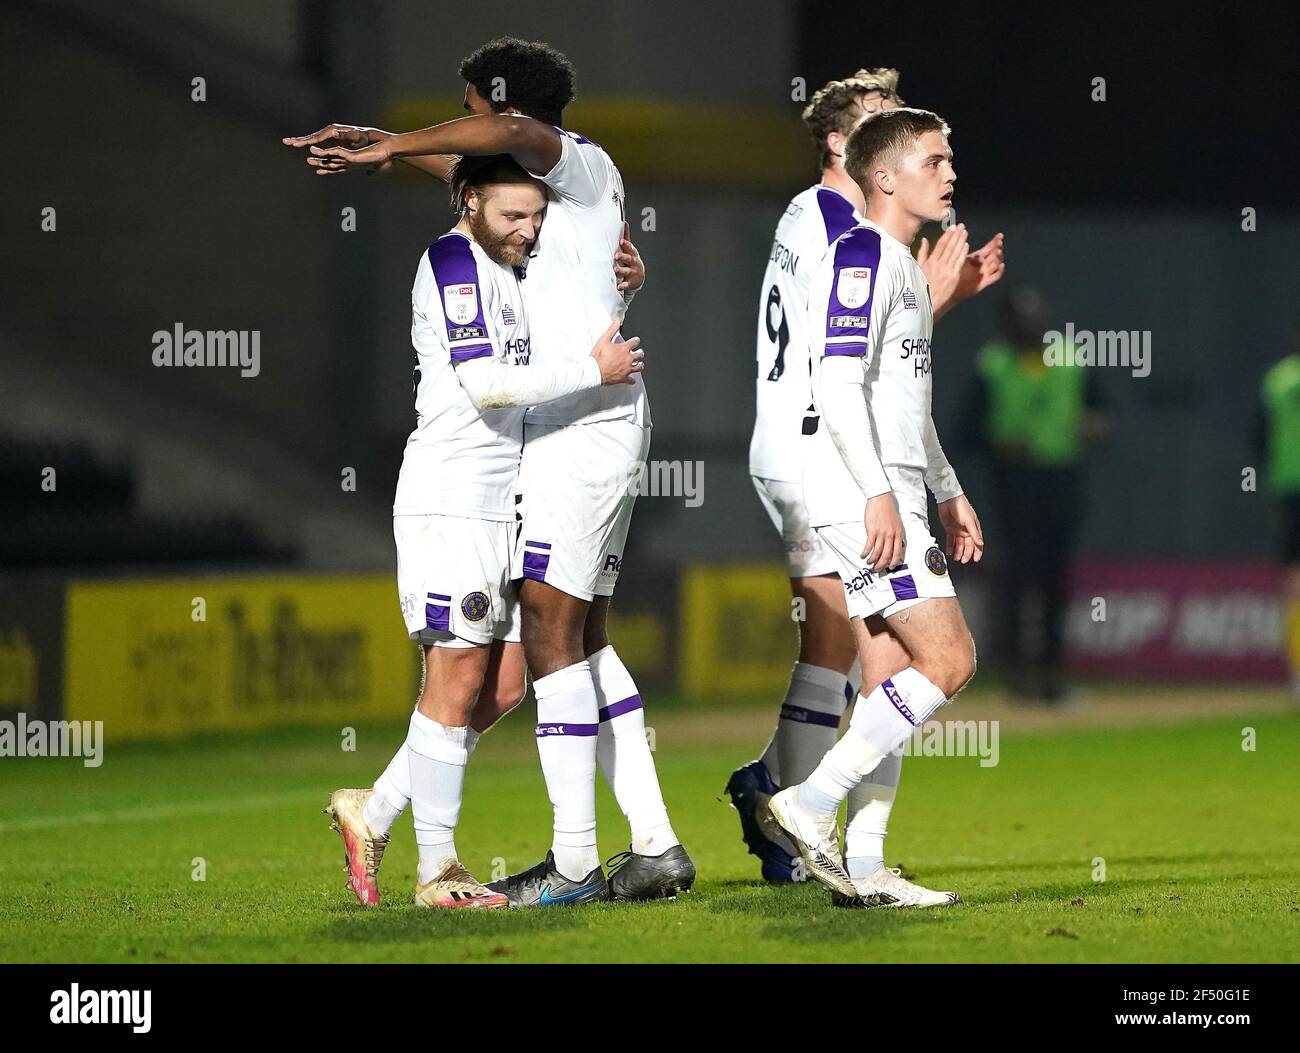 Shrewsbury Town's Harry Chapman (left) celebrates scoring their side's second goal of the game with team-mates during the Sky Bet League One match at the Pirelli Stadium, Burton upon Trent. Picture date: Tuesday March 23, 2021. Stock Photo